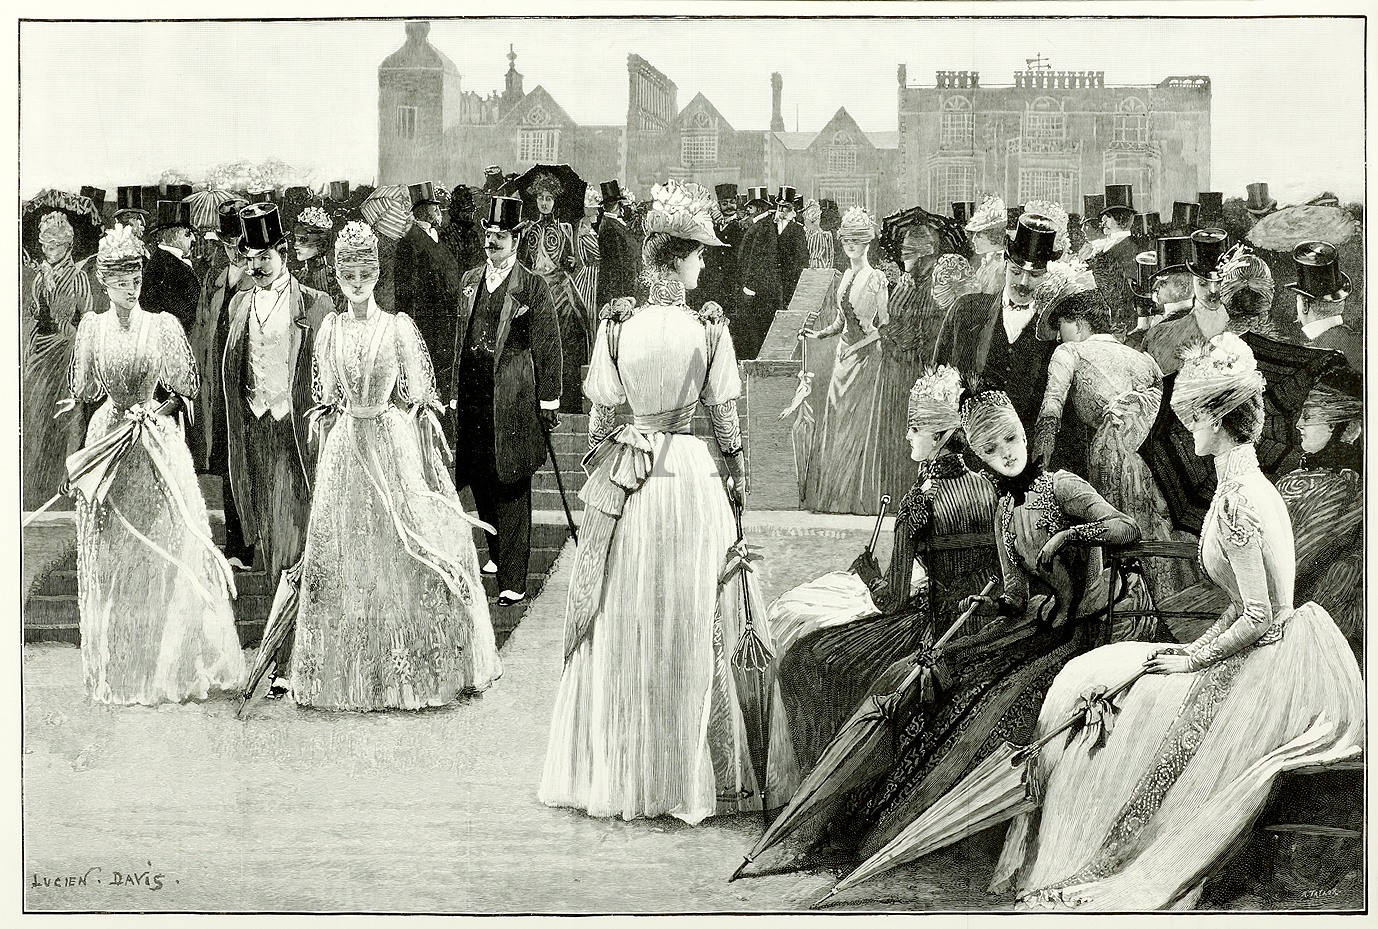 Garden Party in Honour of the Shah at Hatfield House, the Seat of the Marquis of Salisbury. - Antique Print from 1889